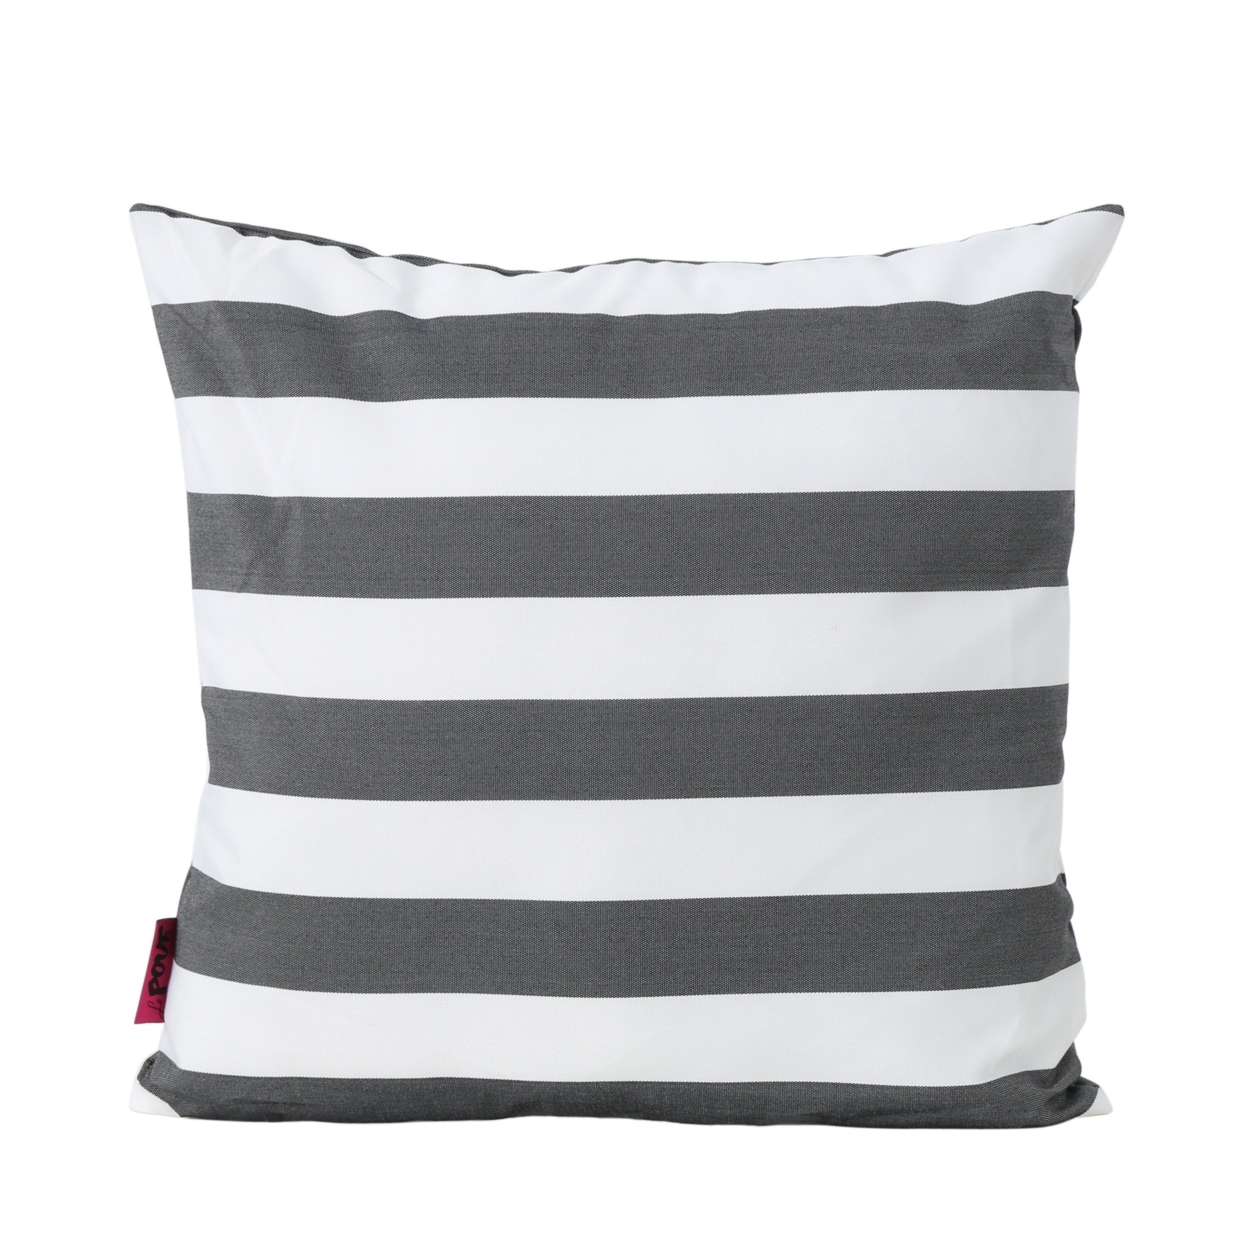 La Mesa Indoor Striped Water Resistant Square Throw Pillow - Dark Teal/white, Set Of 2